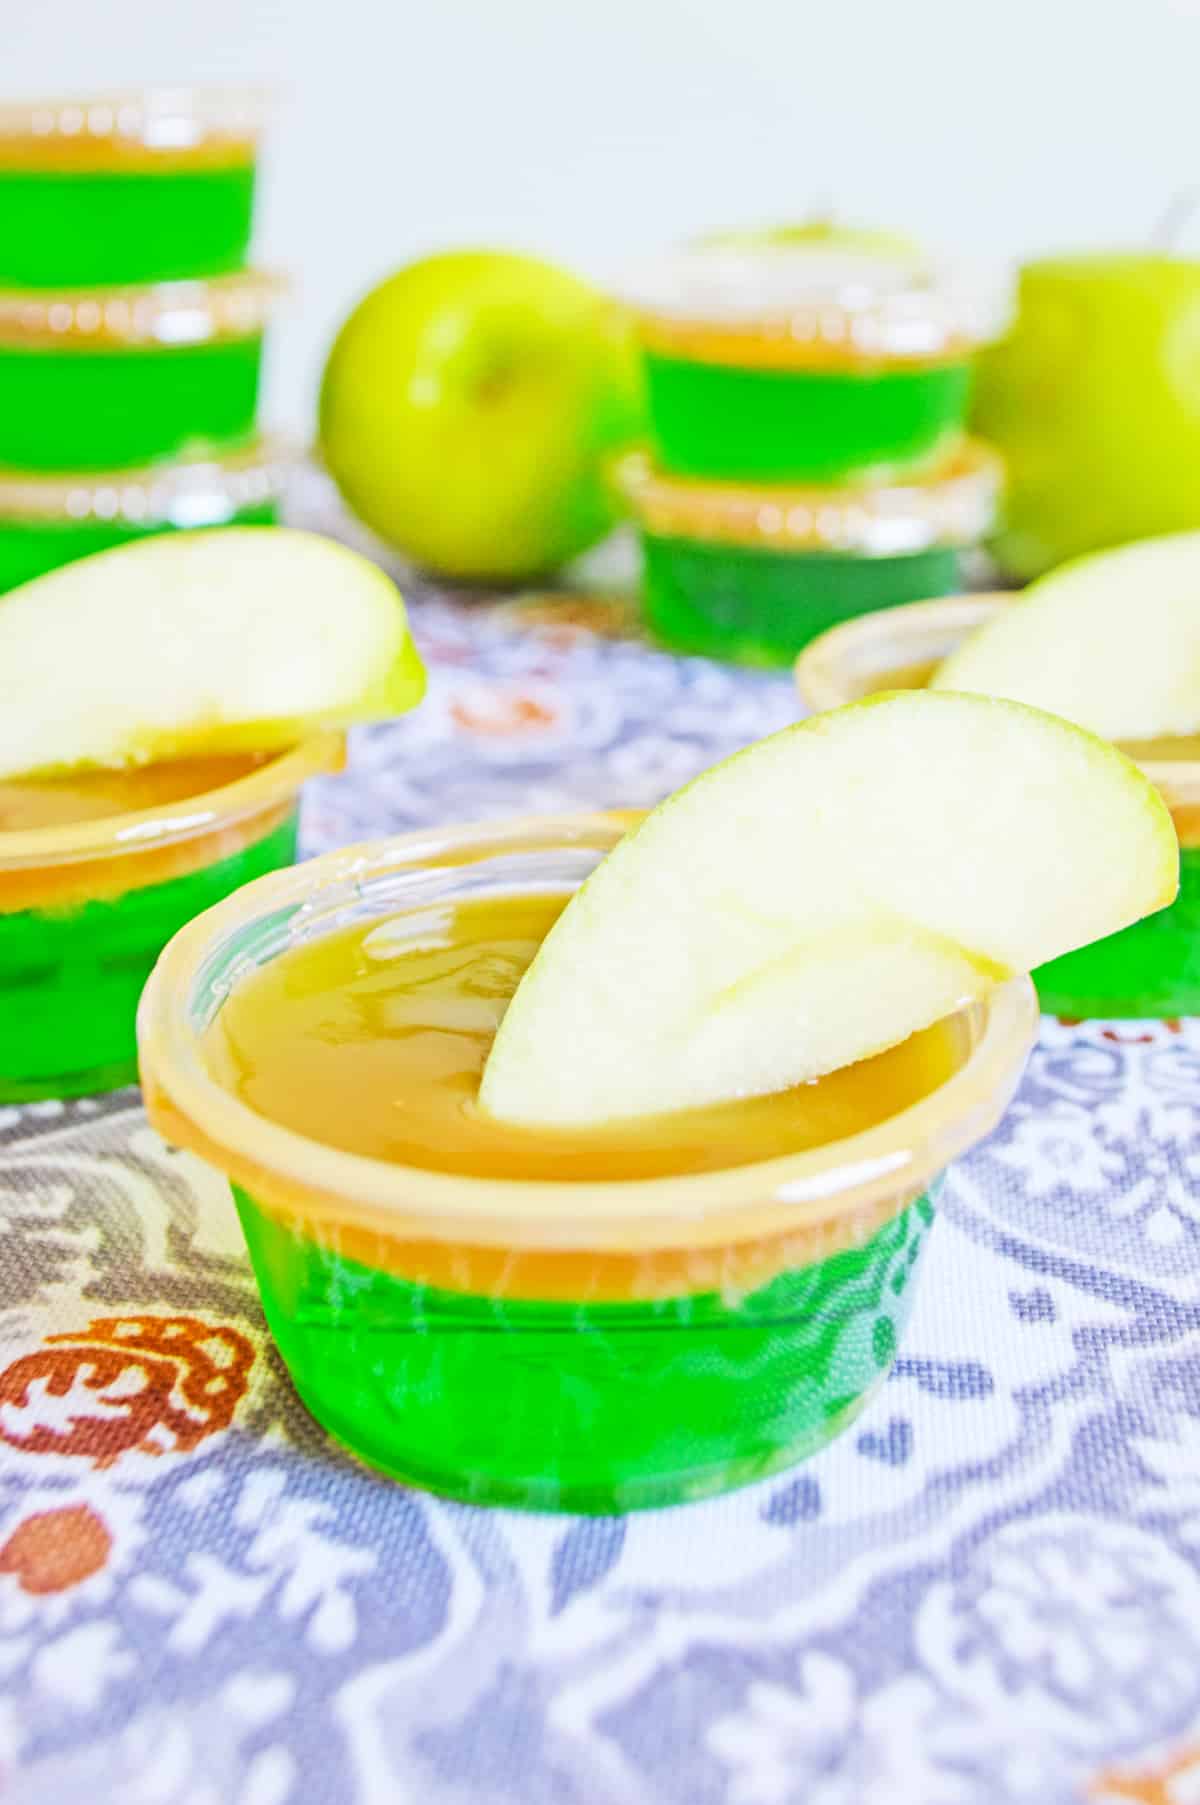 Caramel Apple Jello Shot in plastic shot glass with caramel topping and garnished with apple wedge.